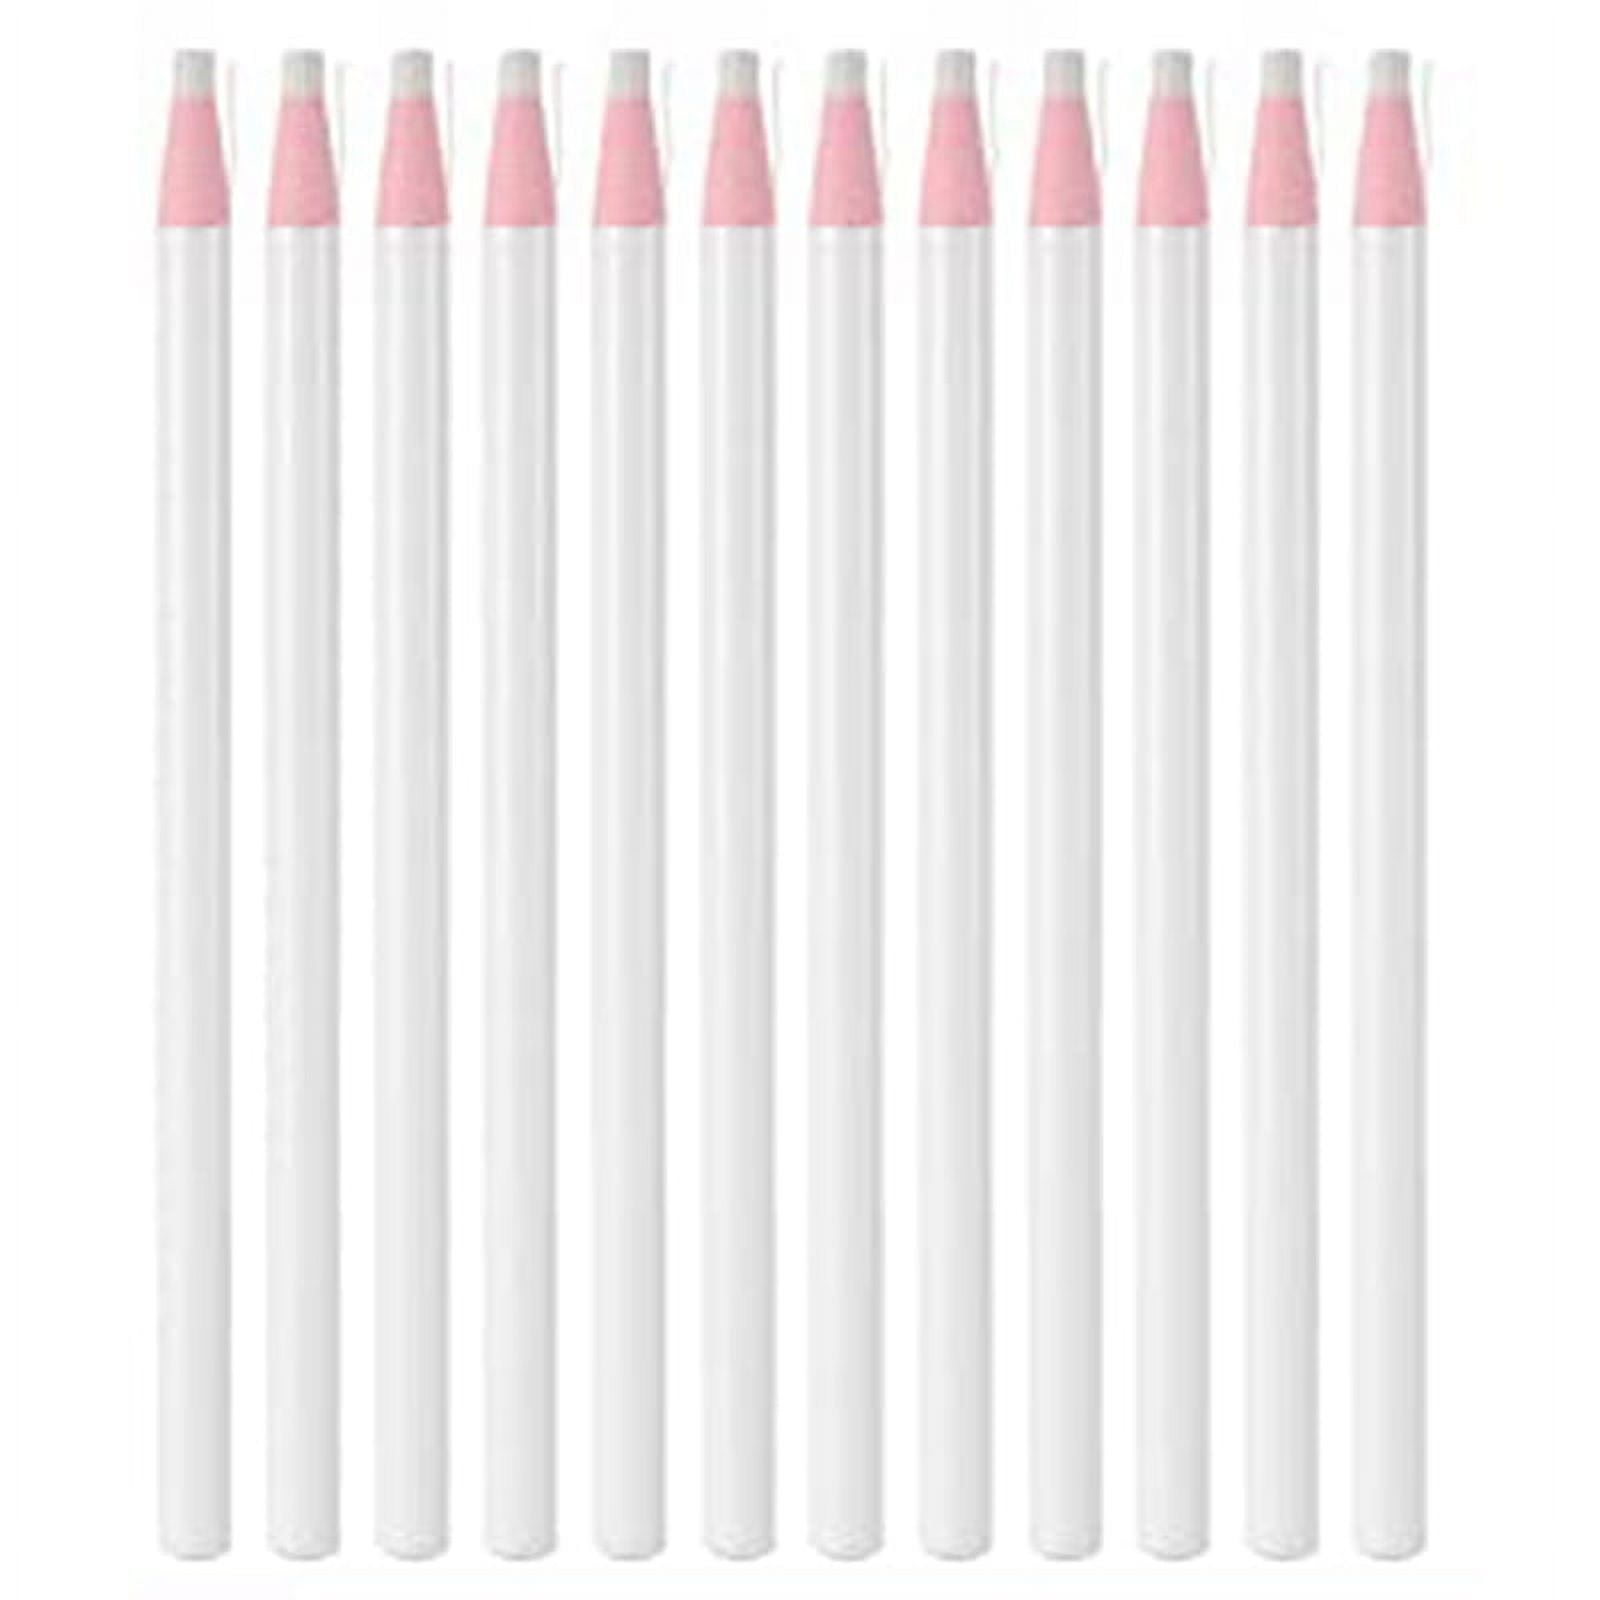  LQ Industrial Sewing Mark Pencil 4PCS White Invisible Erasable Fabric  Pencils for Sewing Marking and Tracing Heat Erase Pen Fabric Chalk : Arts,  Crafts & Sewing